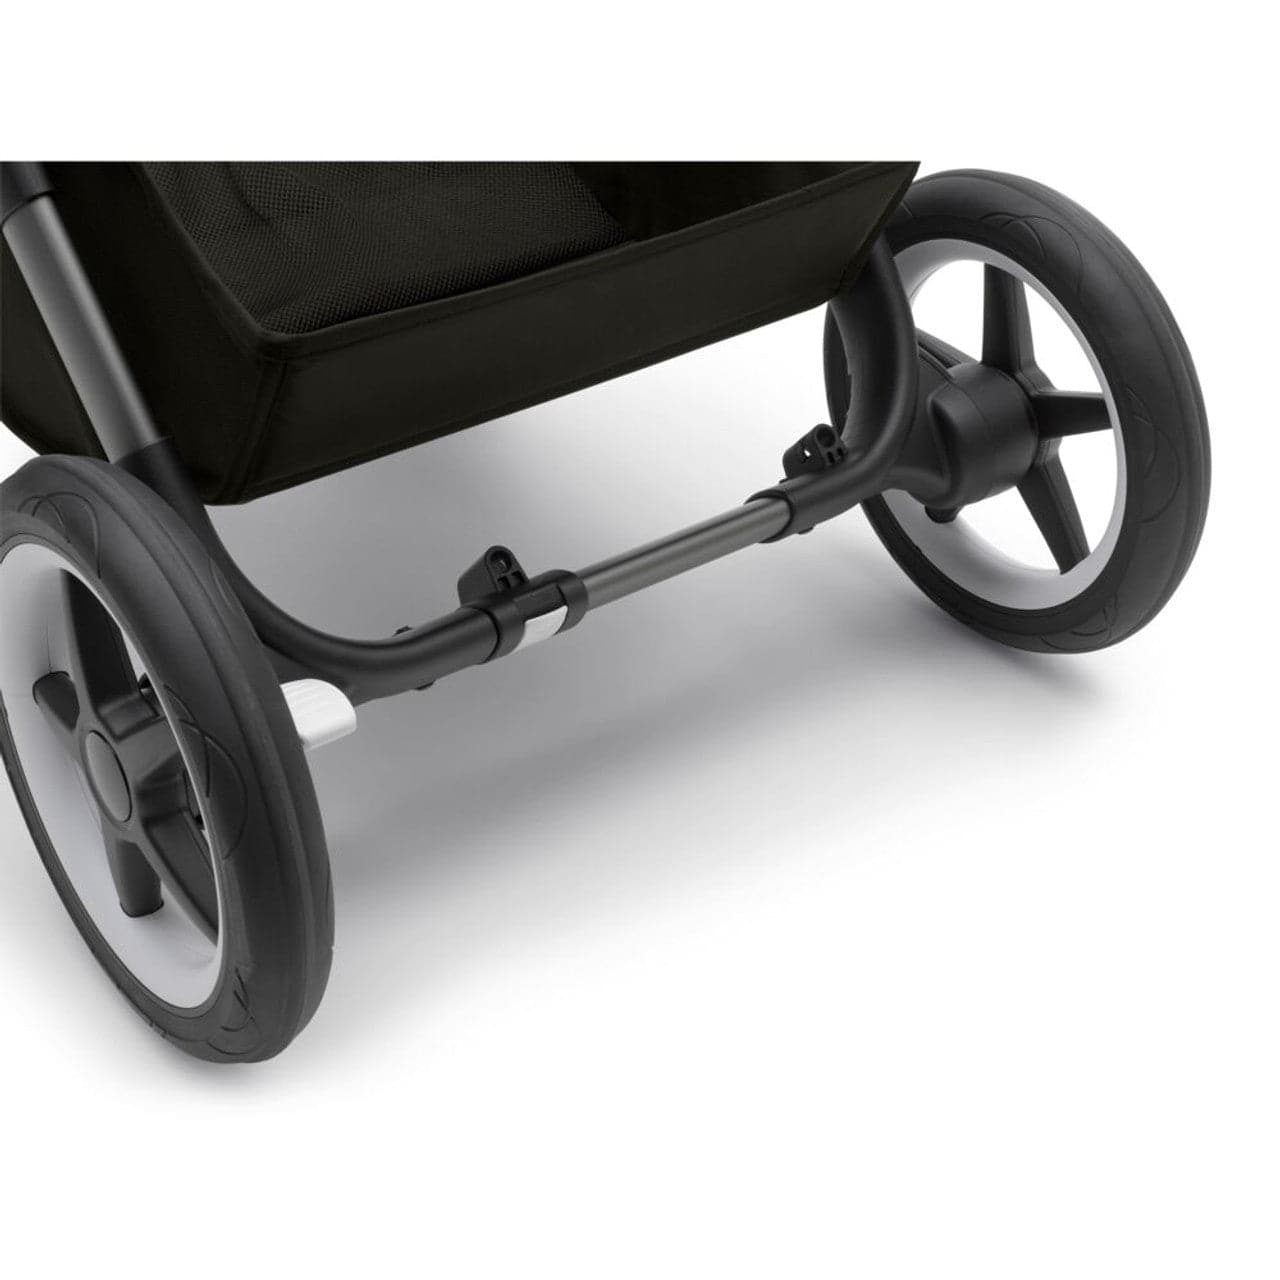 Bugaboo Donkey 5 Duo Pushchair on Graphite/Grey Chassis - Choose Your Colour -  | For Your Little One